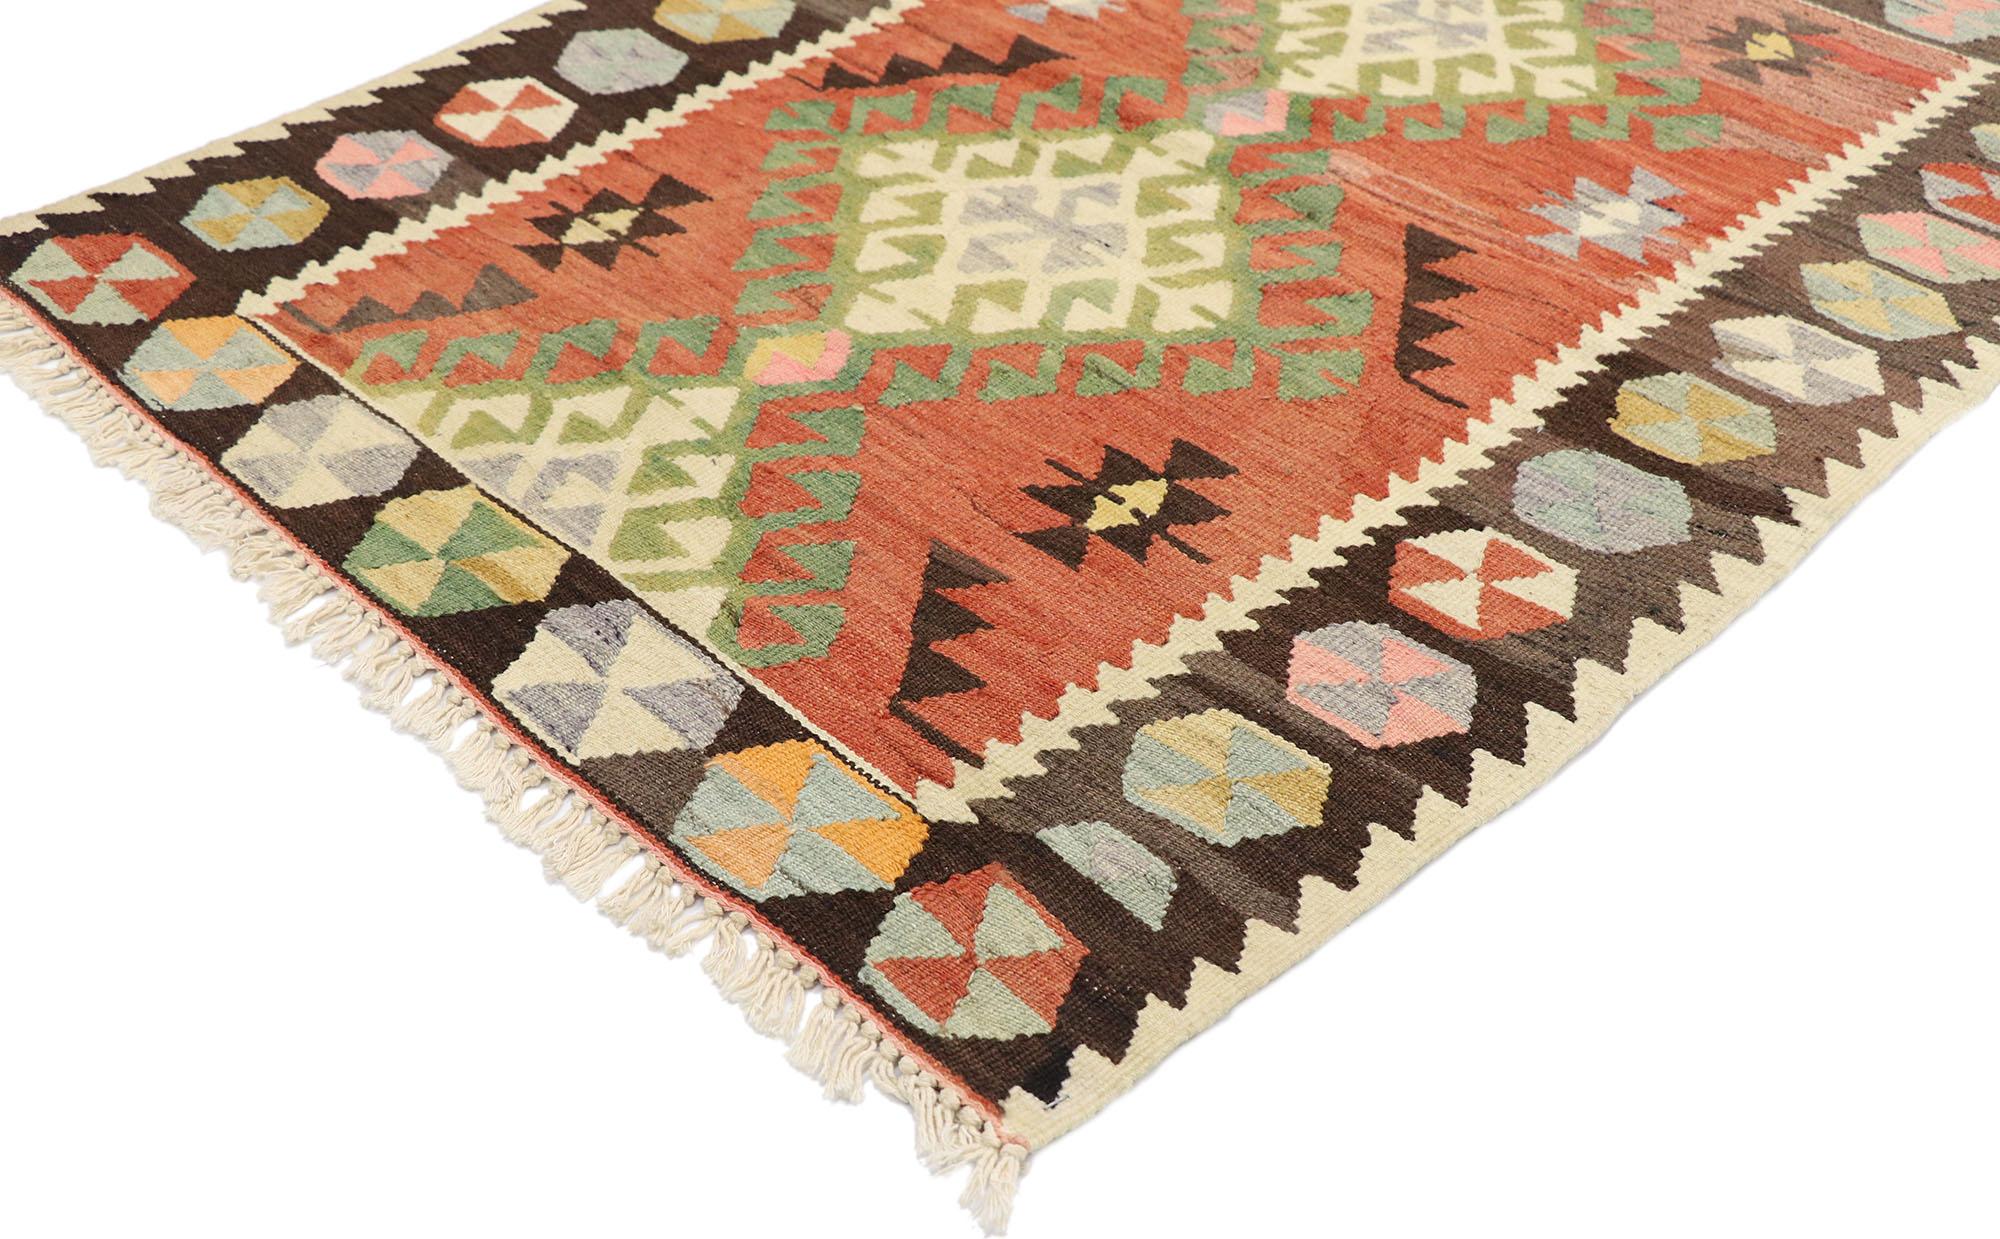 77850 Vintage Persian Shiraz Kilim rug with Tribal style 03'00 x 03'09. Full of tiny details and a bold expressive design combined with vibrant colors and tribal style, this hand-woven wool vintage Persian Shiraz kilim rug is a captivating vision of